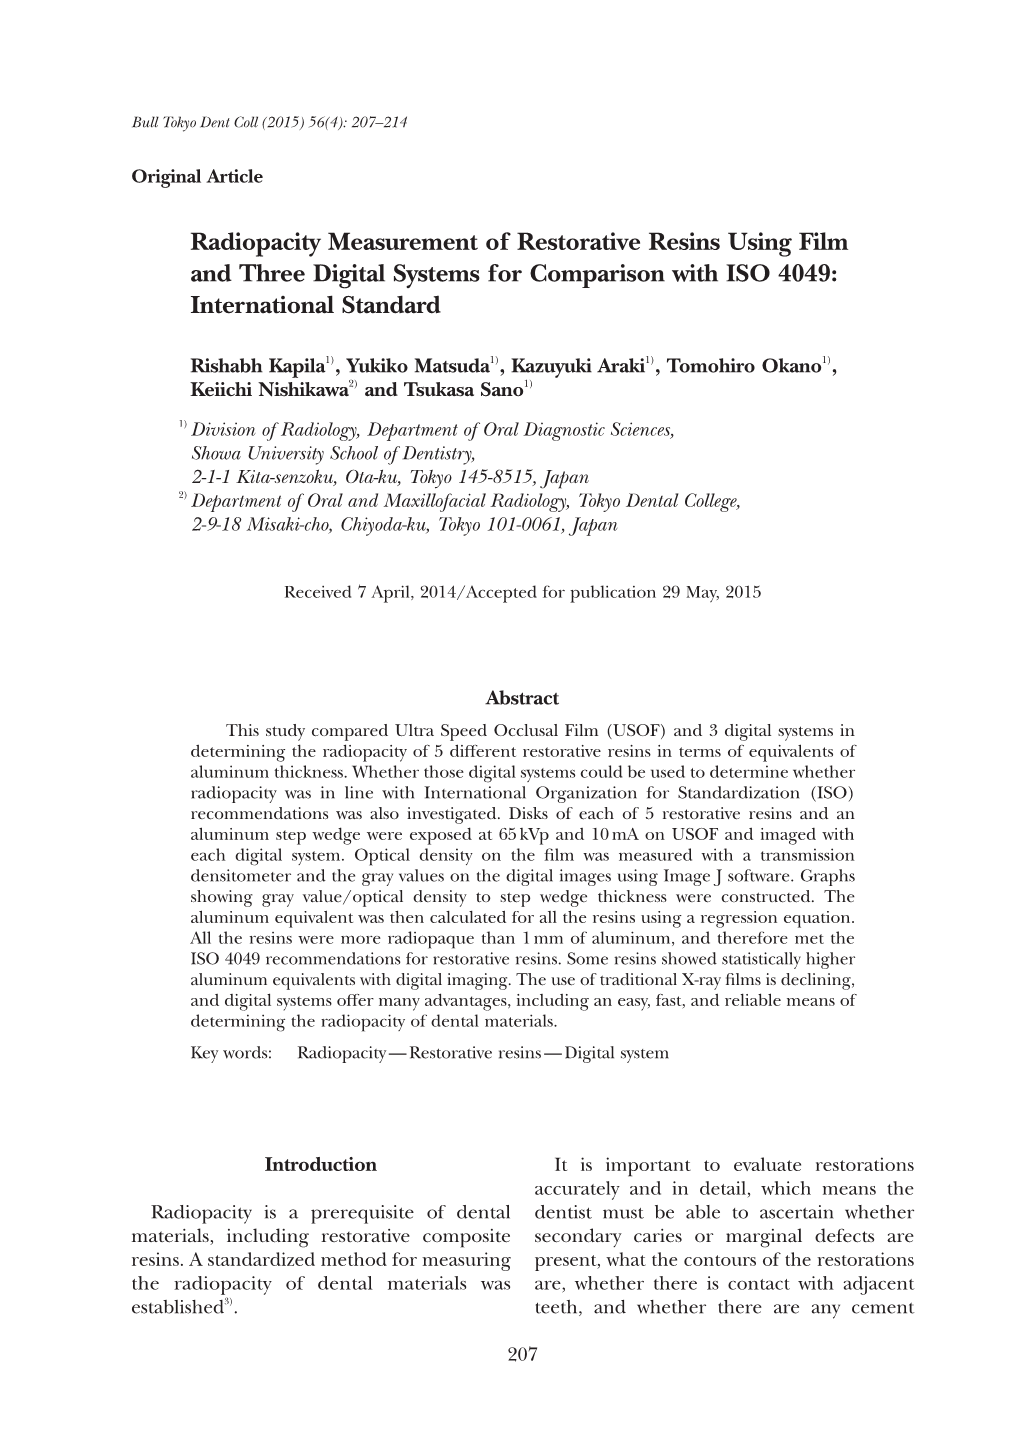 Radiopacity Measurement of Restorative Resins Using Film and Three Digital Systems for Comparison with ISO 4049: International Standard